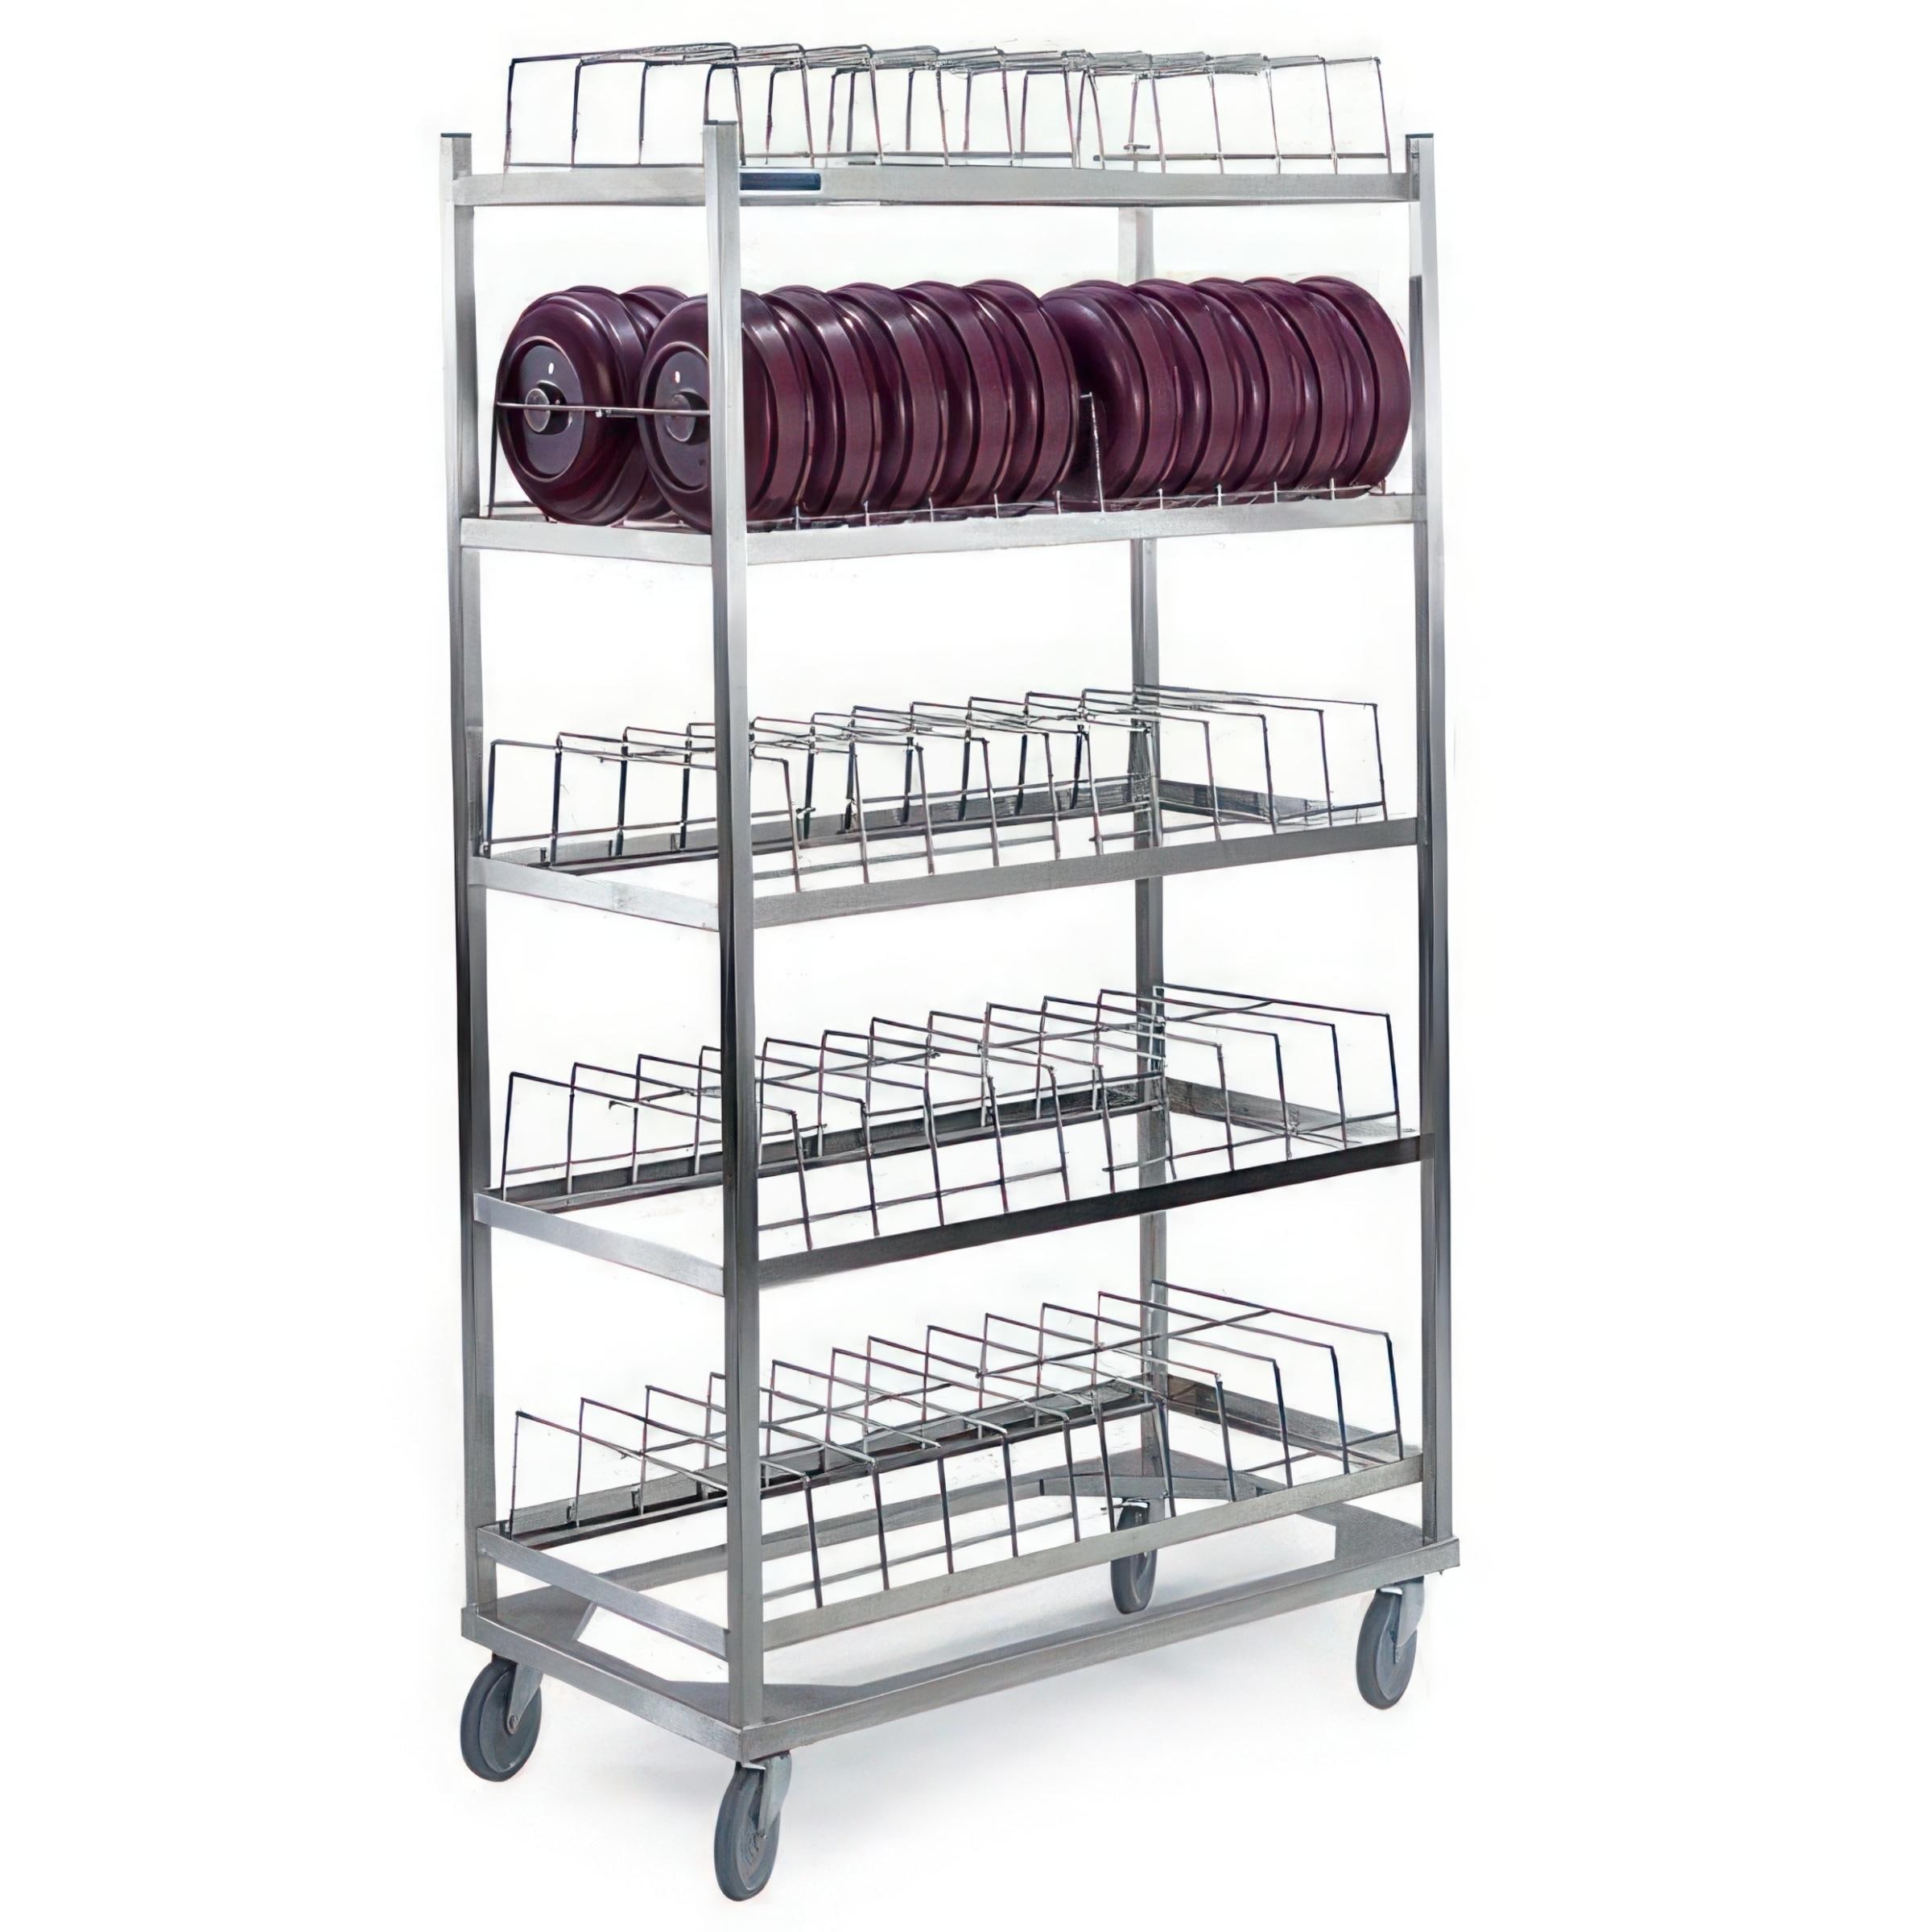 Lakeside 898 Mobile Dome Drying Rack, Stainless Steel, (5) Shelves, (10)  Chrome Dome Cradles fit 3-in. Tall Domes, 100 Dome Capacity - Lakeside  Foodservice